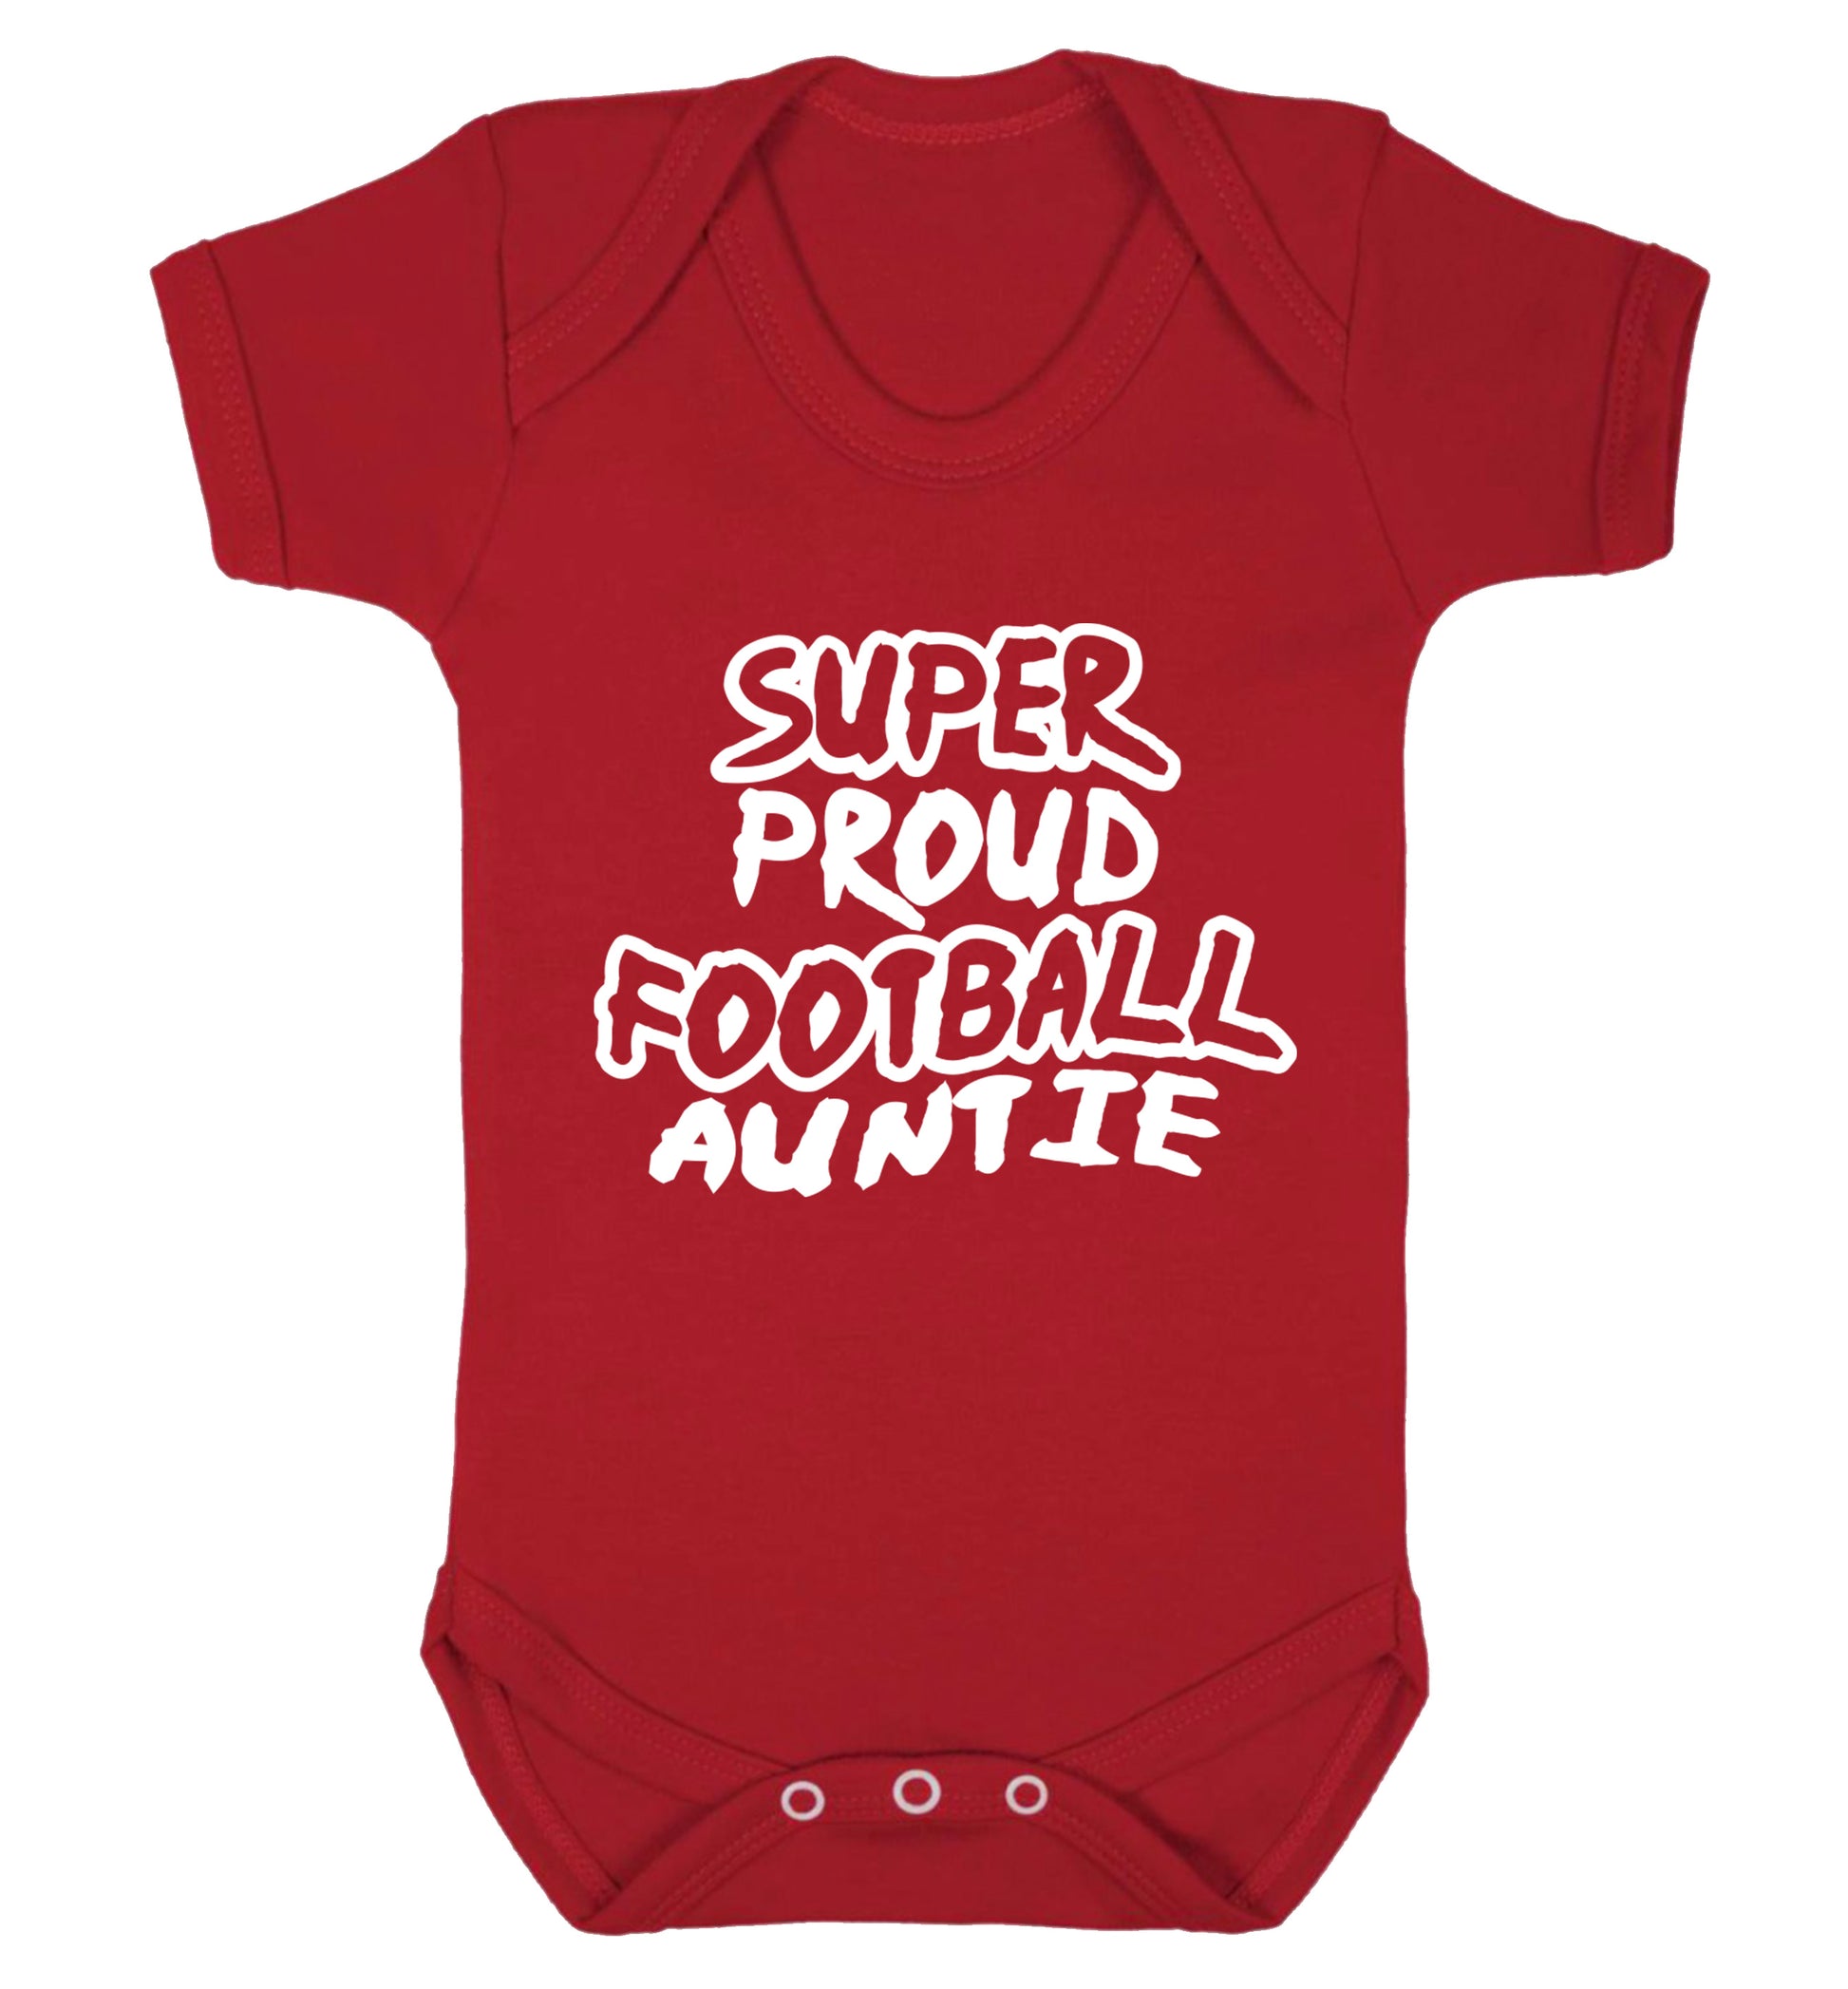 Super proud football auntie Baby Vest red 18-24 months